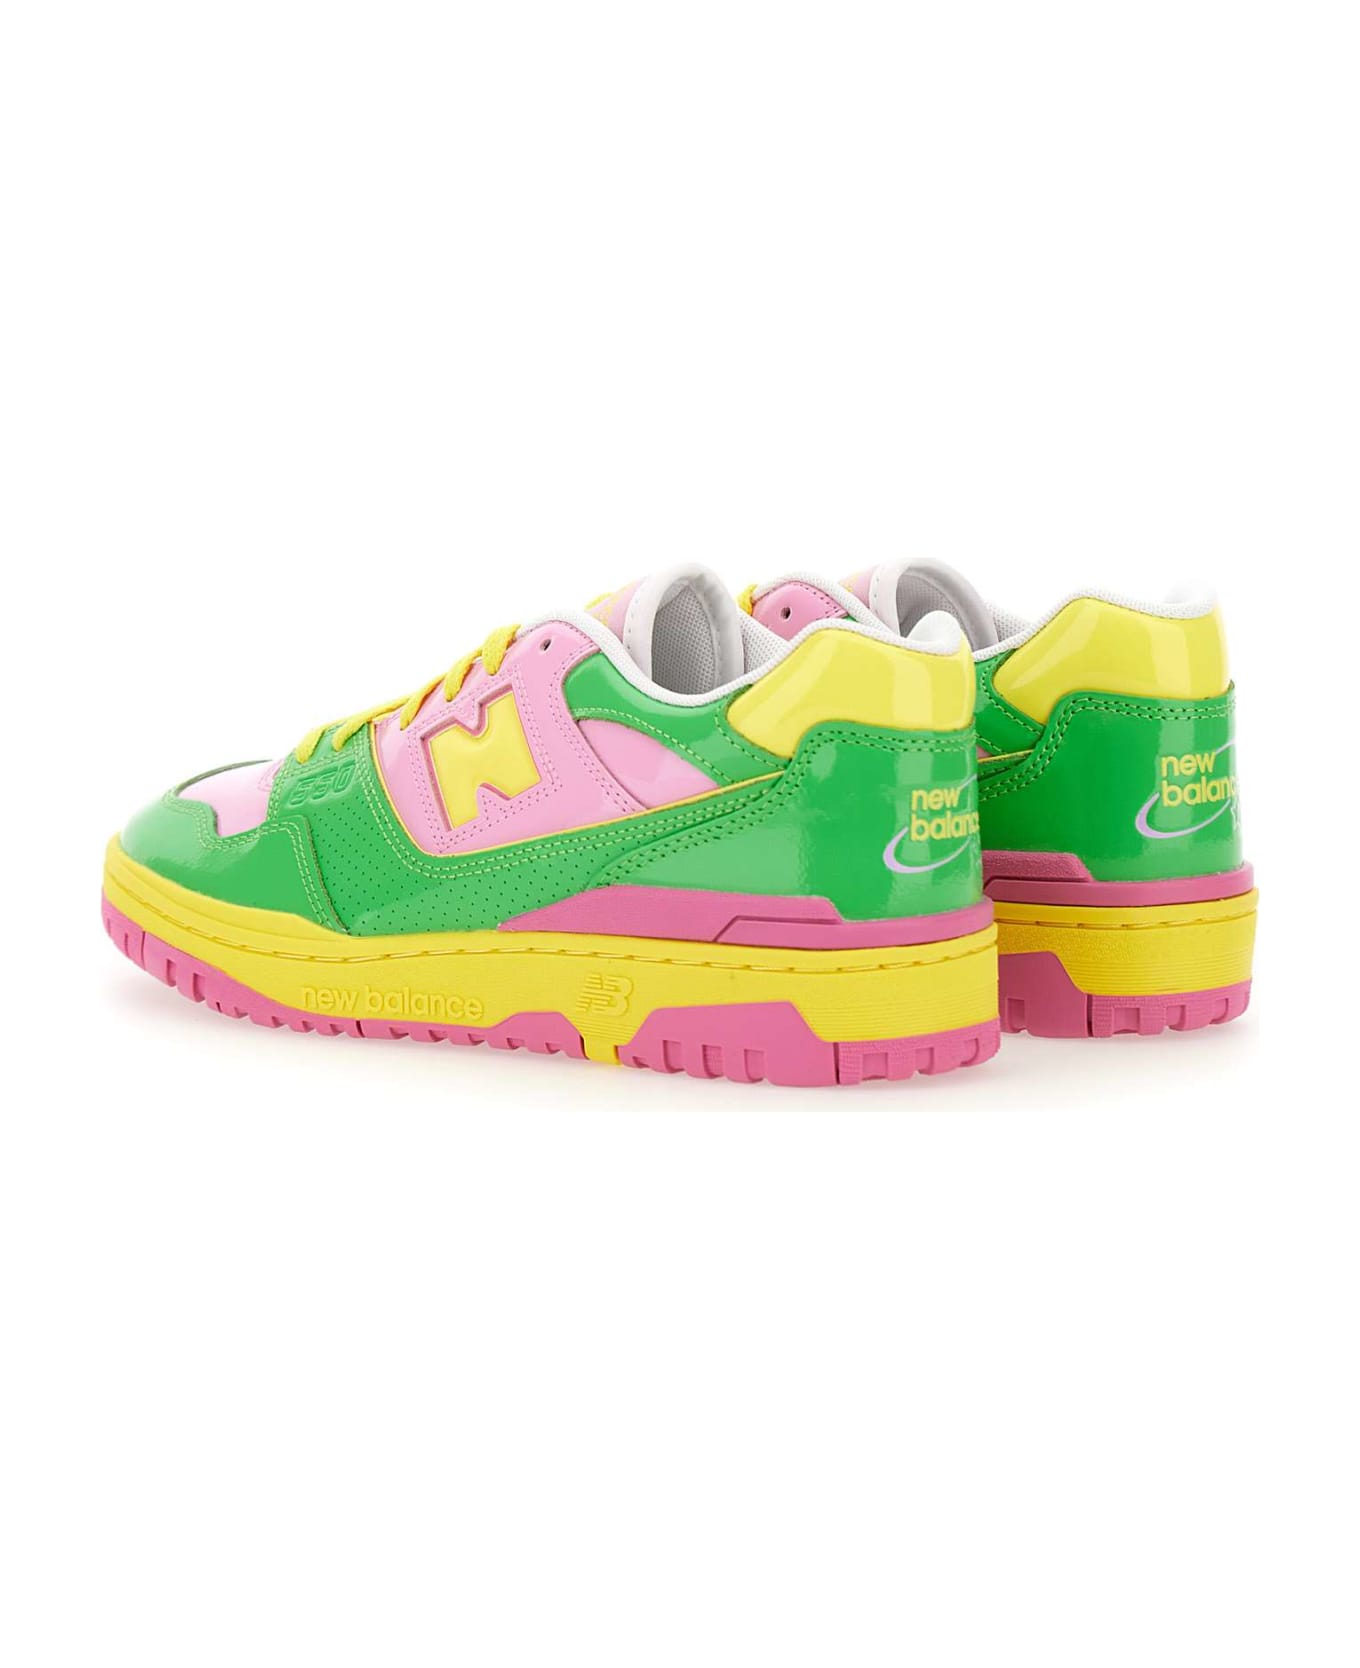 New Balance "bb550" Sneakers - Pink-green-lime